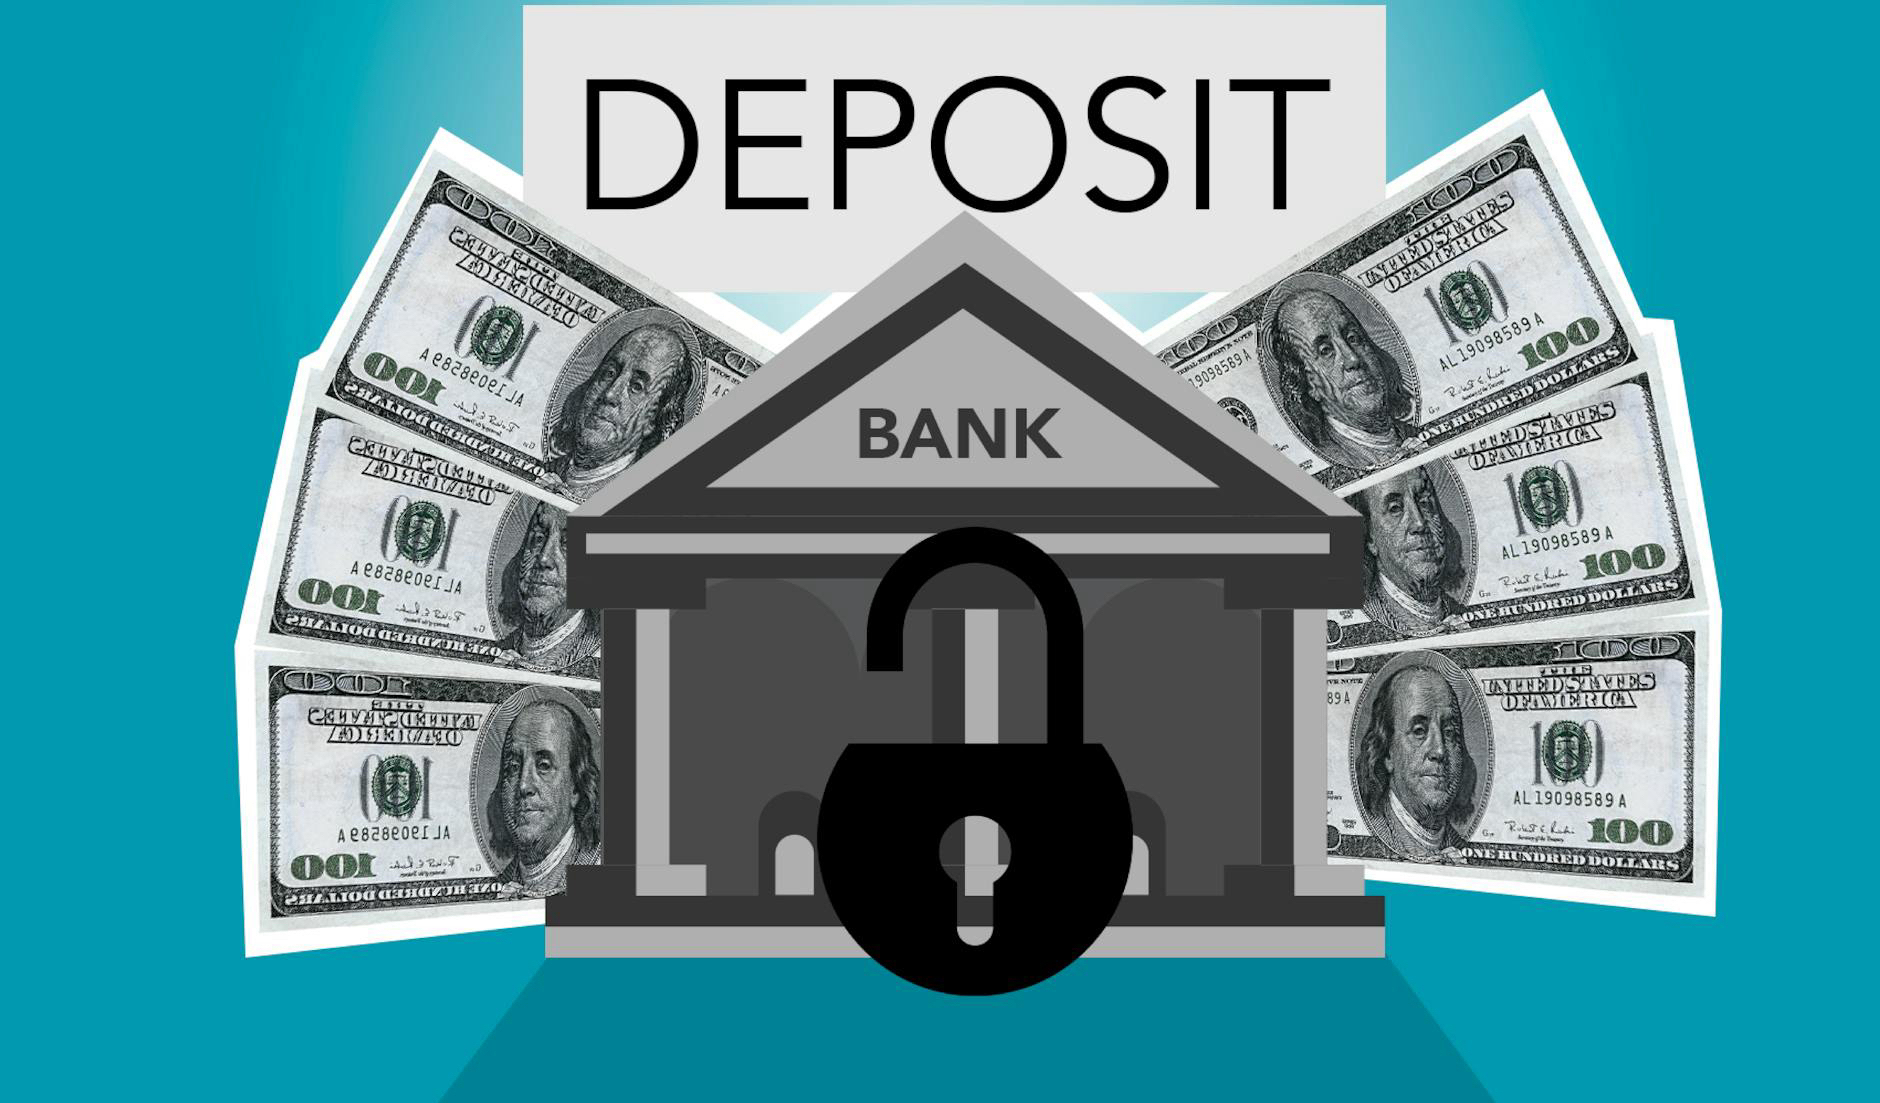 Investment in “Term Deposits” increased due to rising interest rates